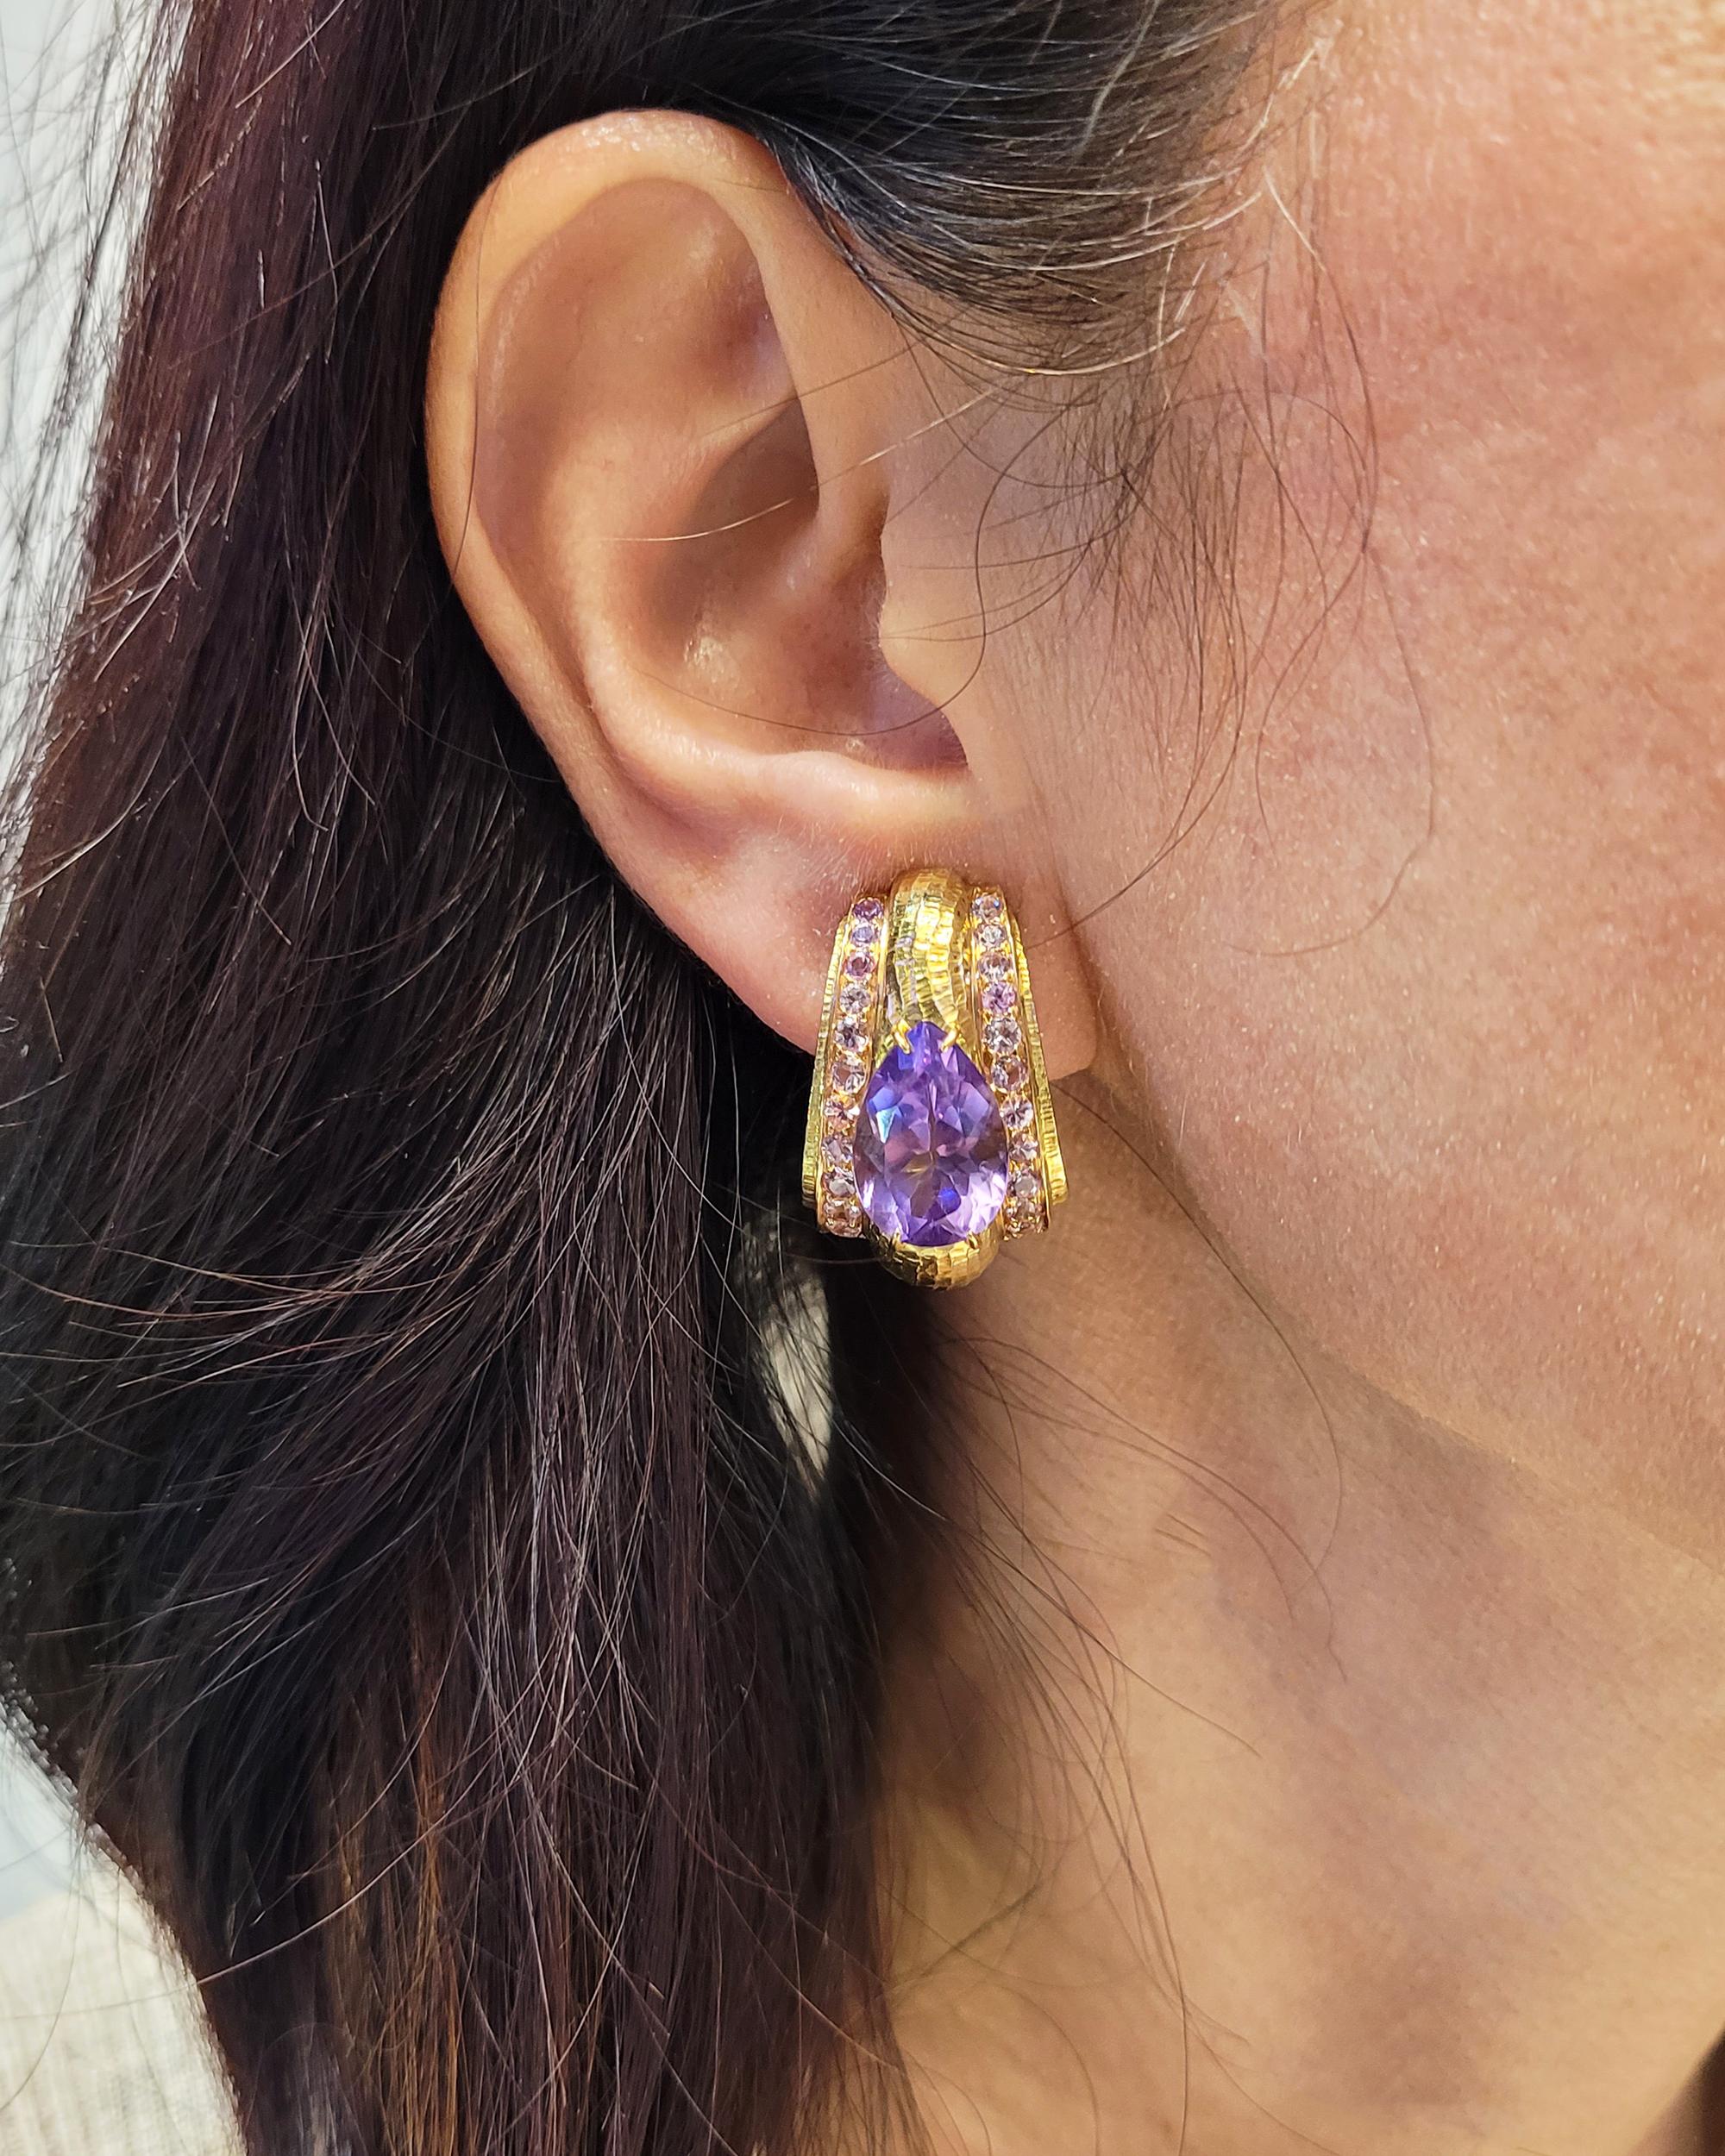 A pair of ear clips made by David Webb.
Featuring two pear-shape amethysts and round pink sapphires.
Mounted in 18k yellow gold with hammered finish. 
Signed David Webb.
Gross weight is 34.07 gr.
Clip-on style.